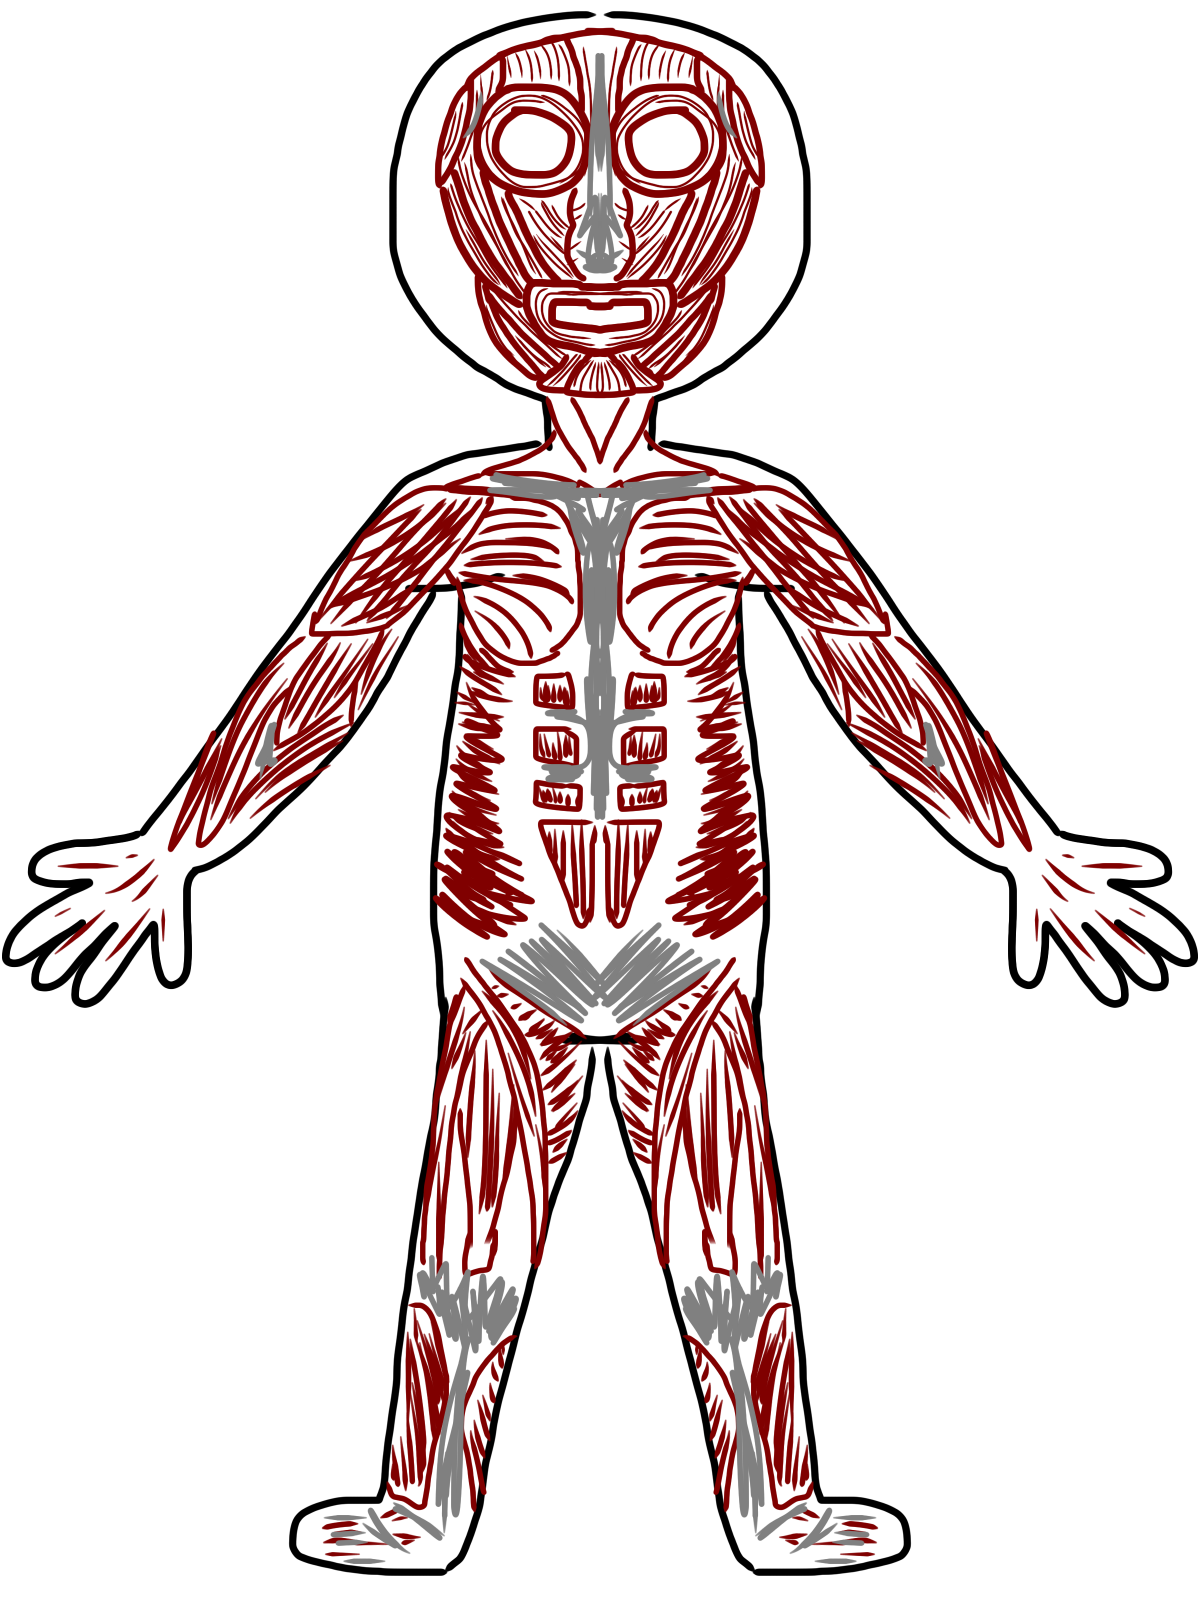 Images For > Muscular System For Kids Pictures - ClipArt Best - ClipArt